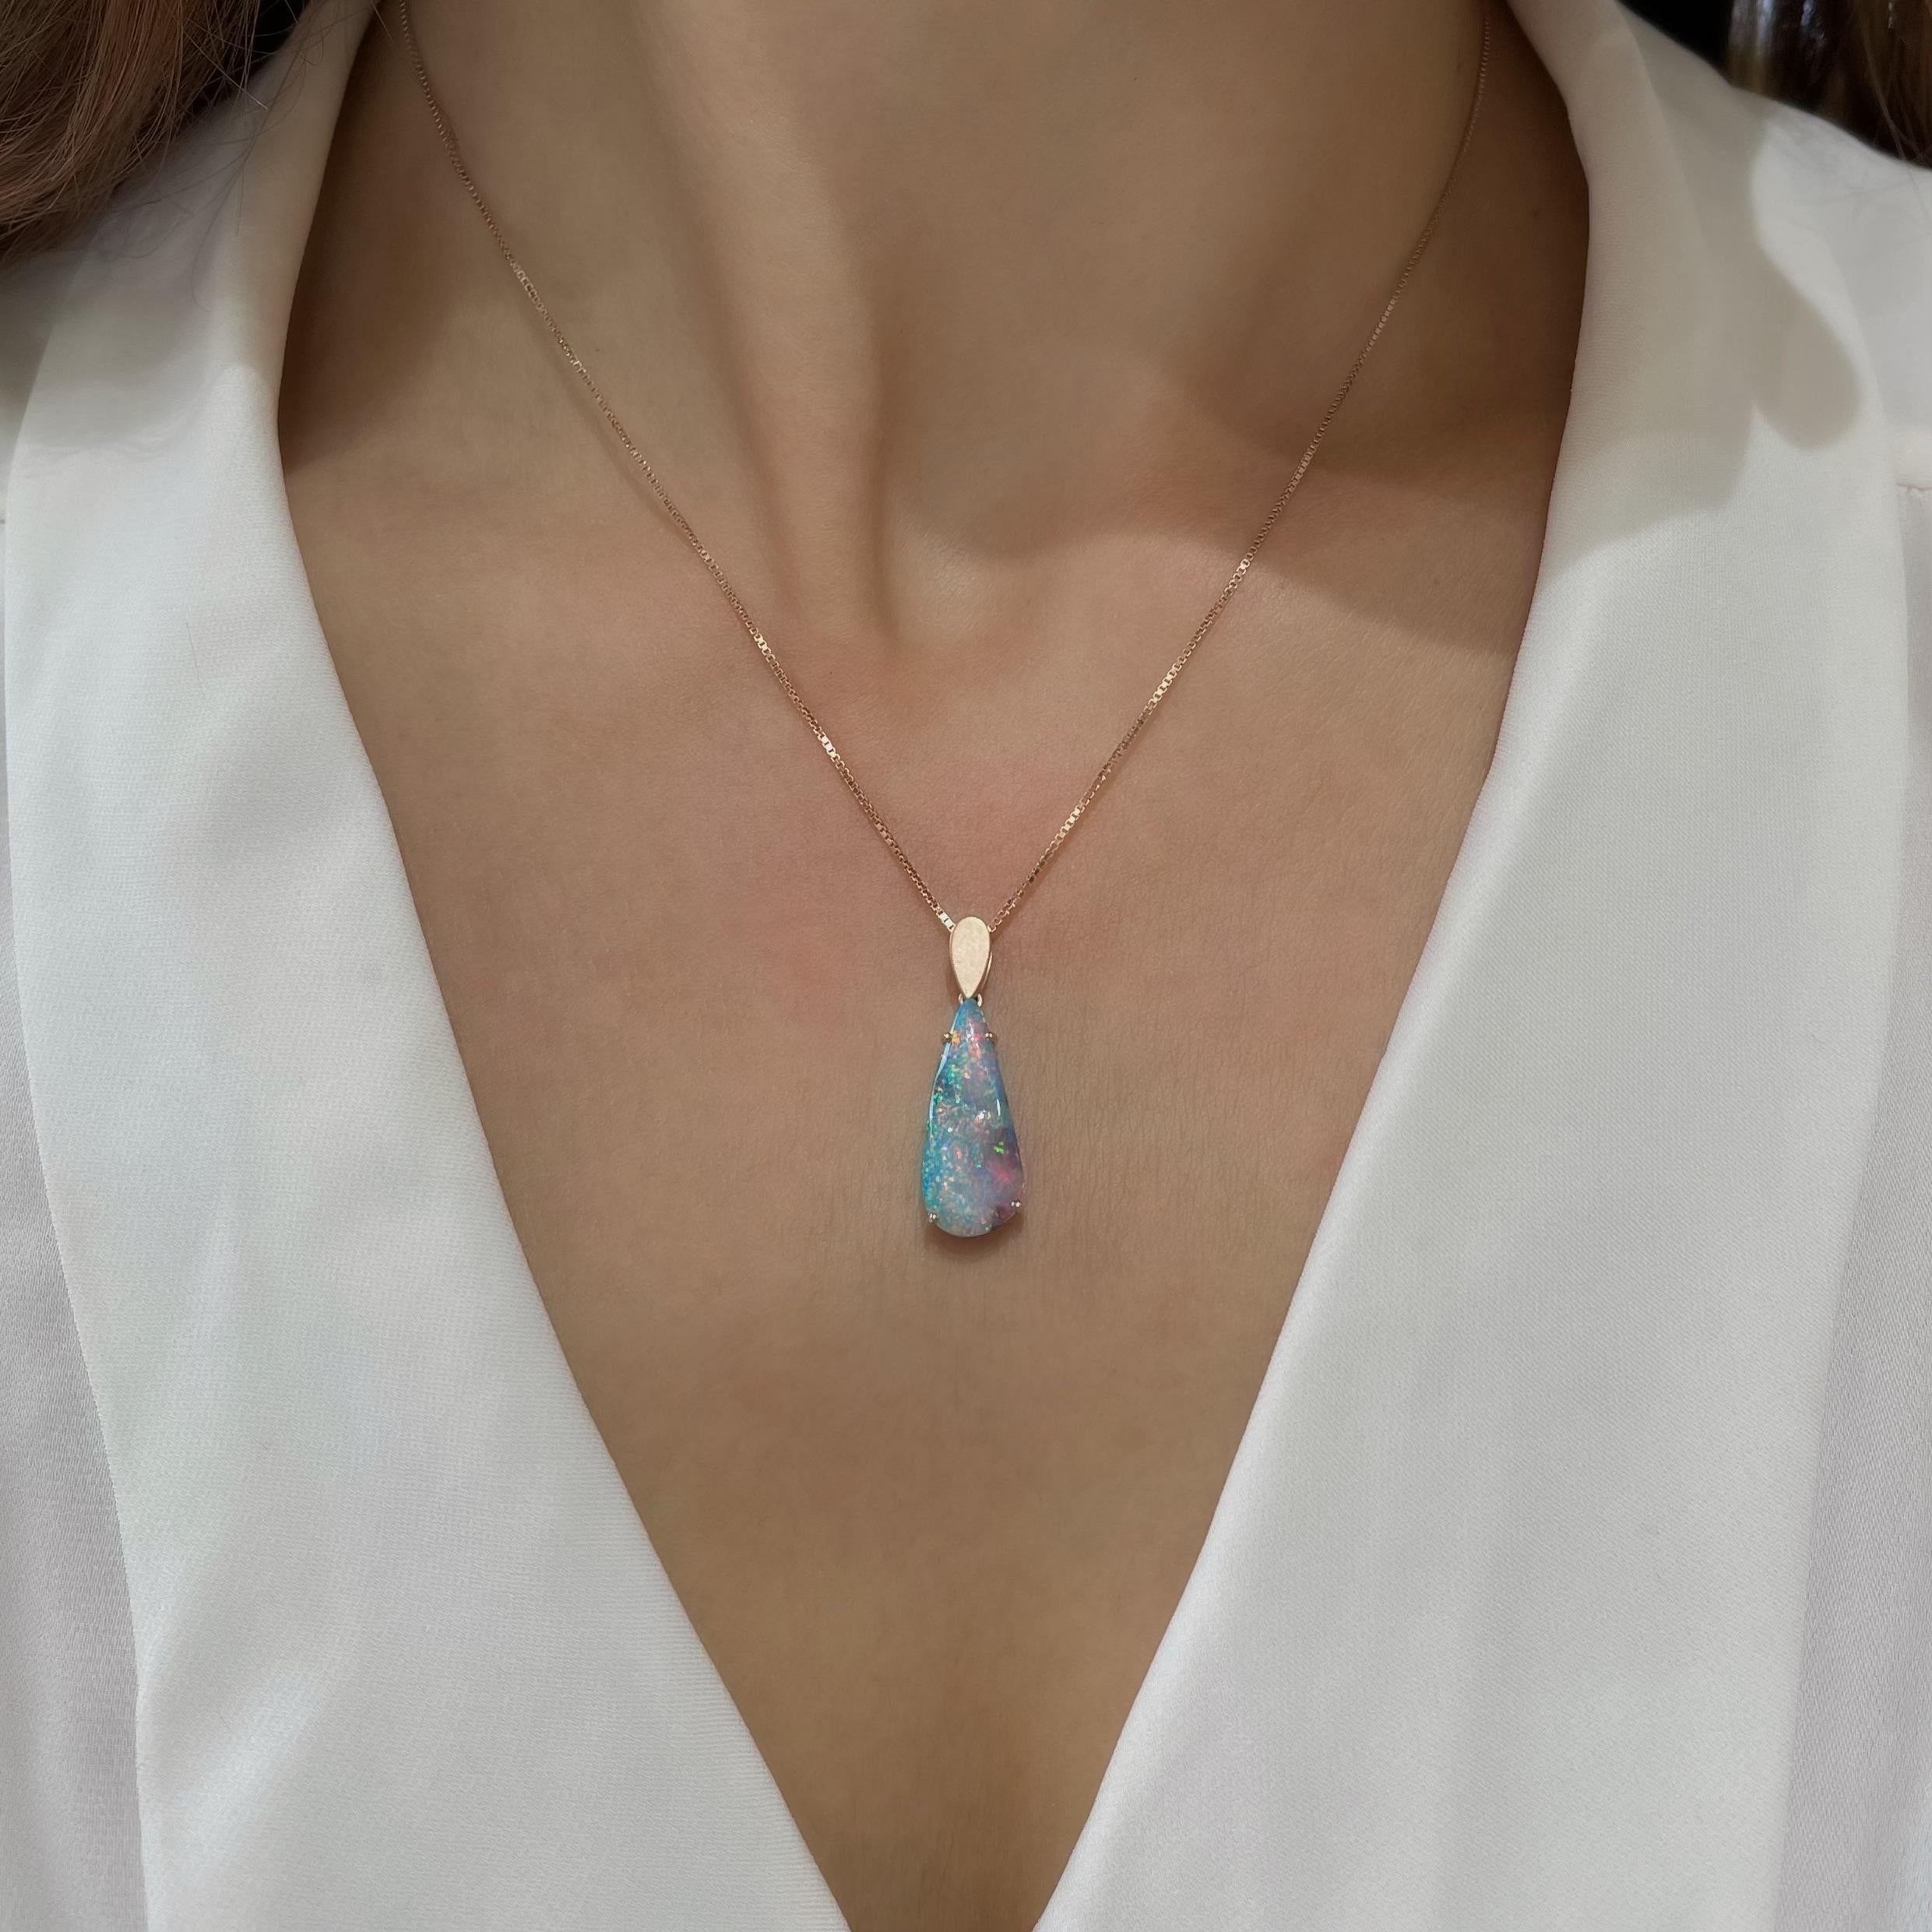 Utterly divine and majestic is the ‘Flames of Passion’ opal pendant. The breathtaking 5.03ct boulder opal ethically sourced from our own mine in Jundah, Australia presents a most alluring play-of-colour that mesmerises all who behold it.